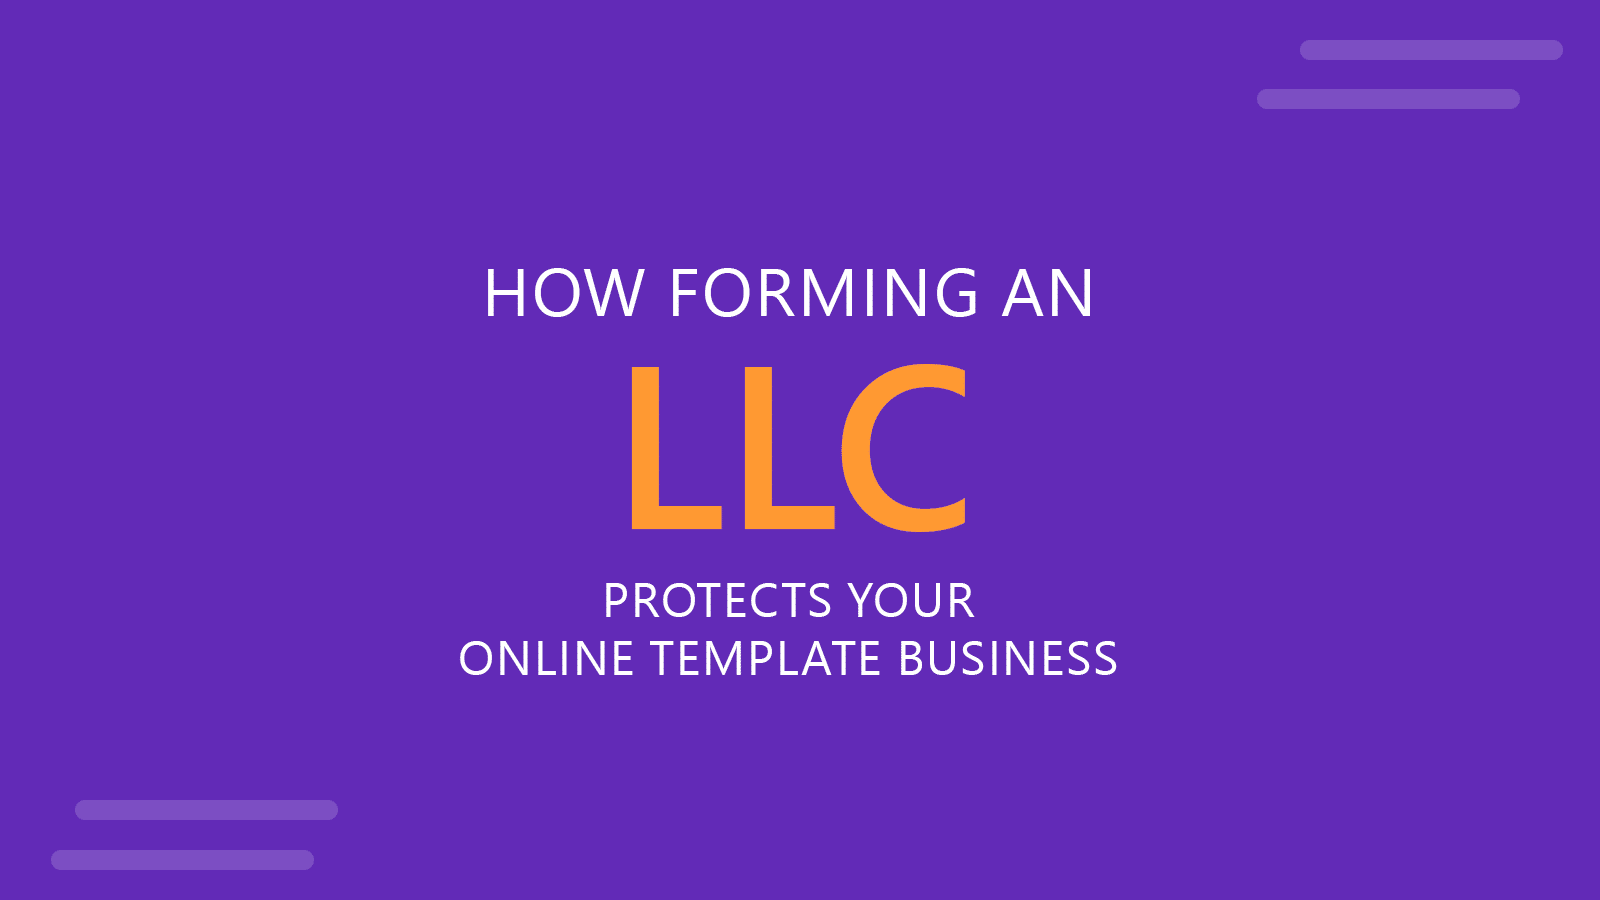 Shielding Your Assets: How Forming an LLC Protects Your Online Template Business